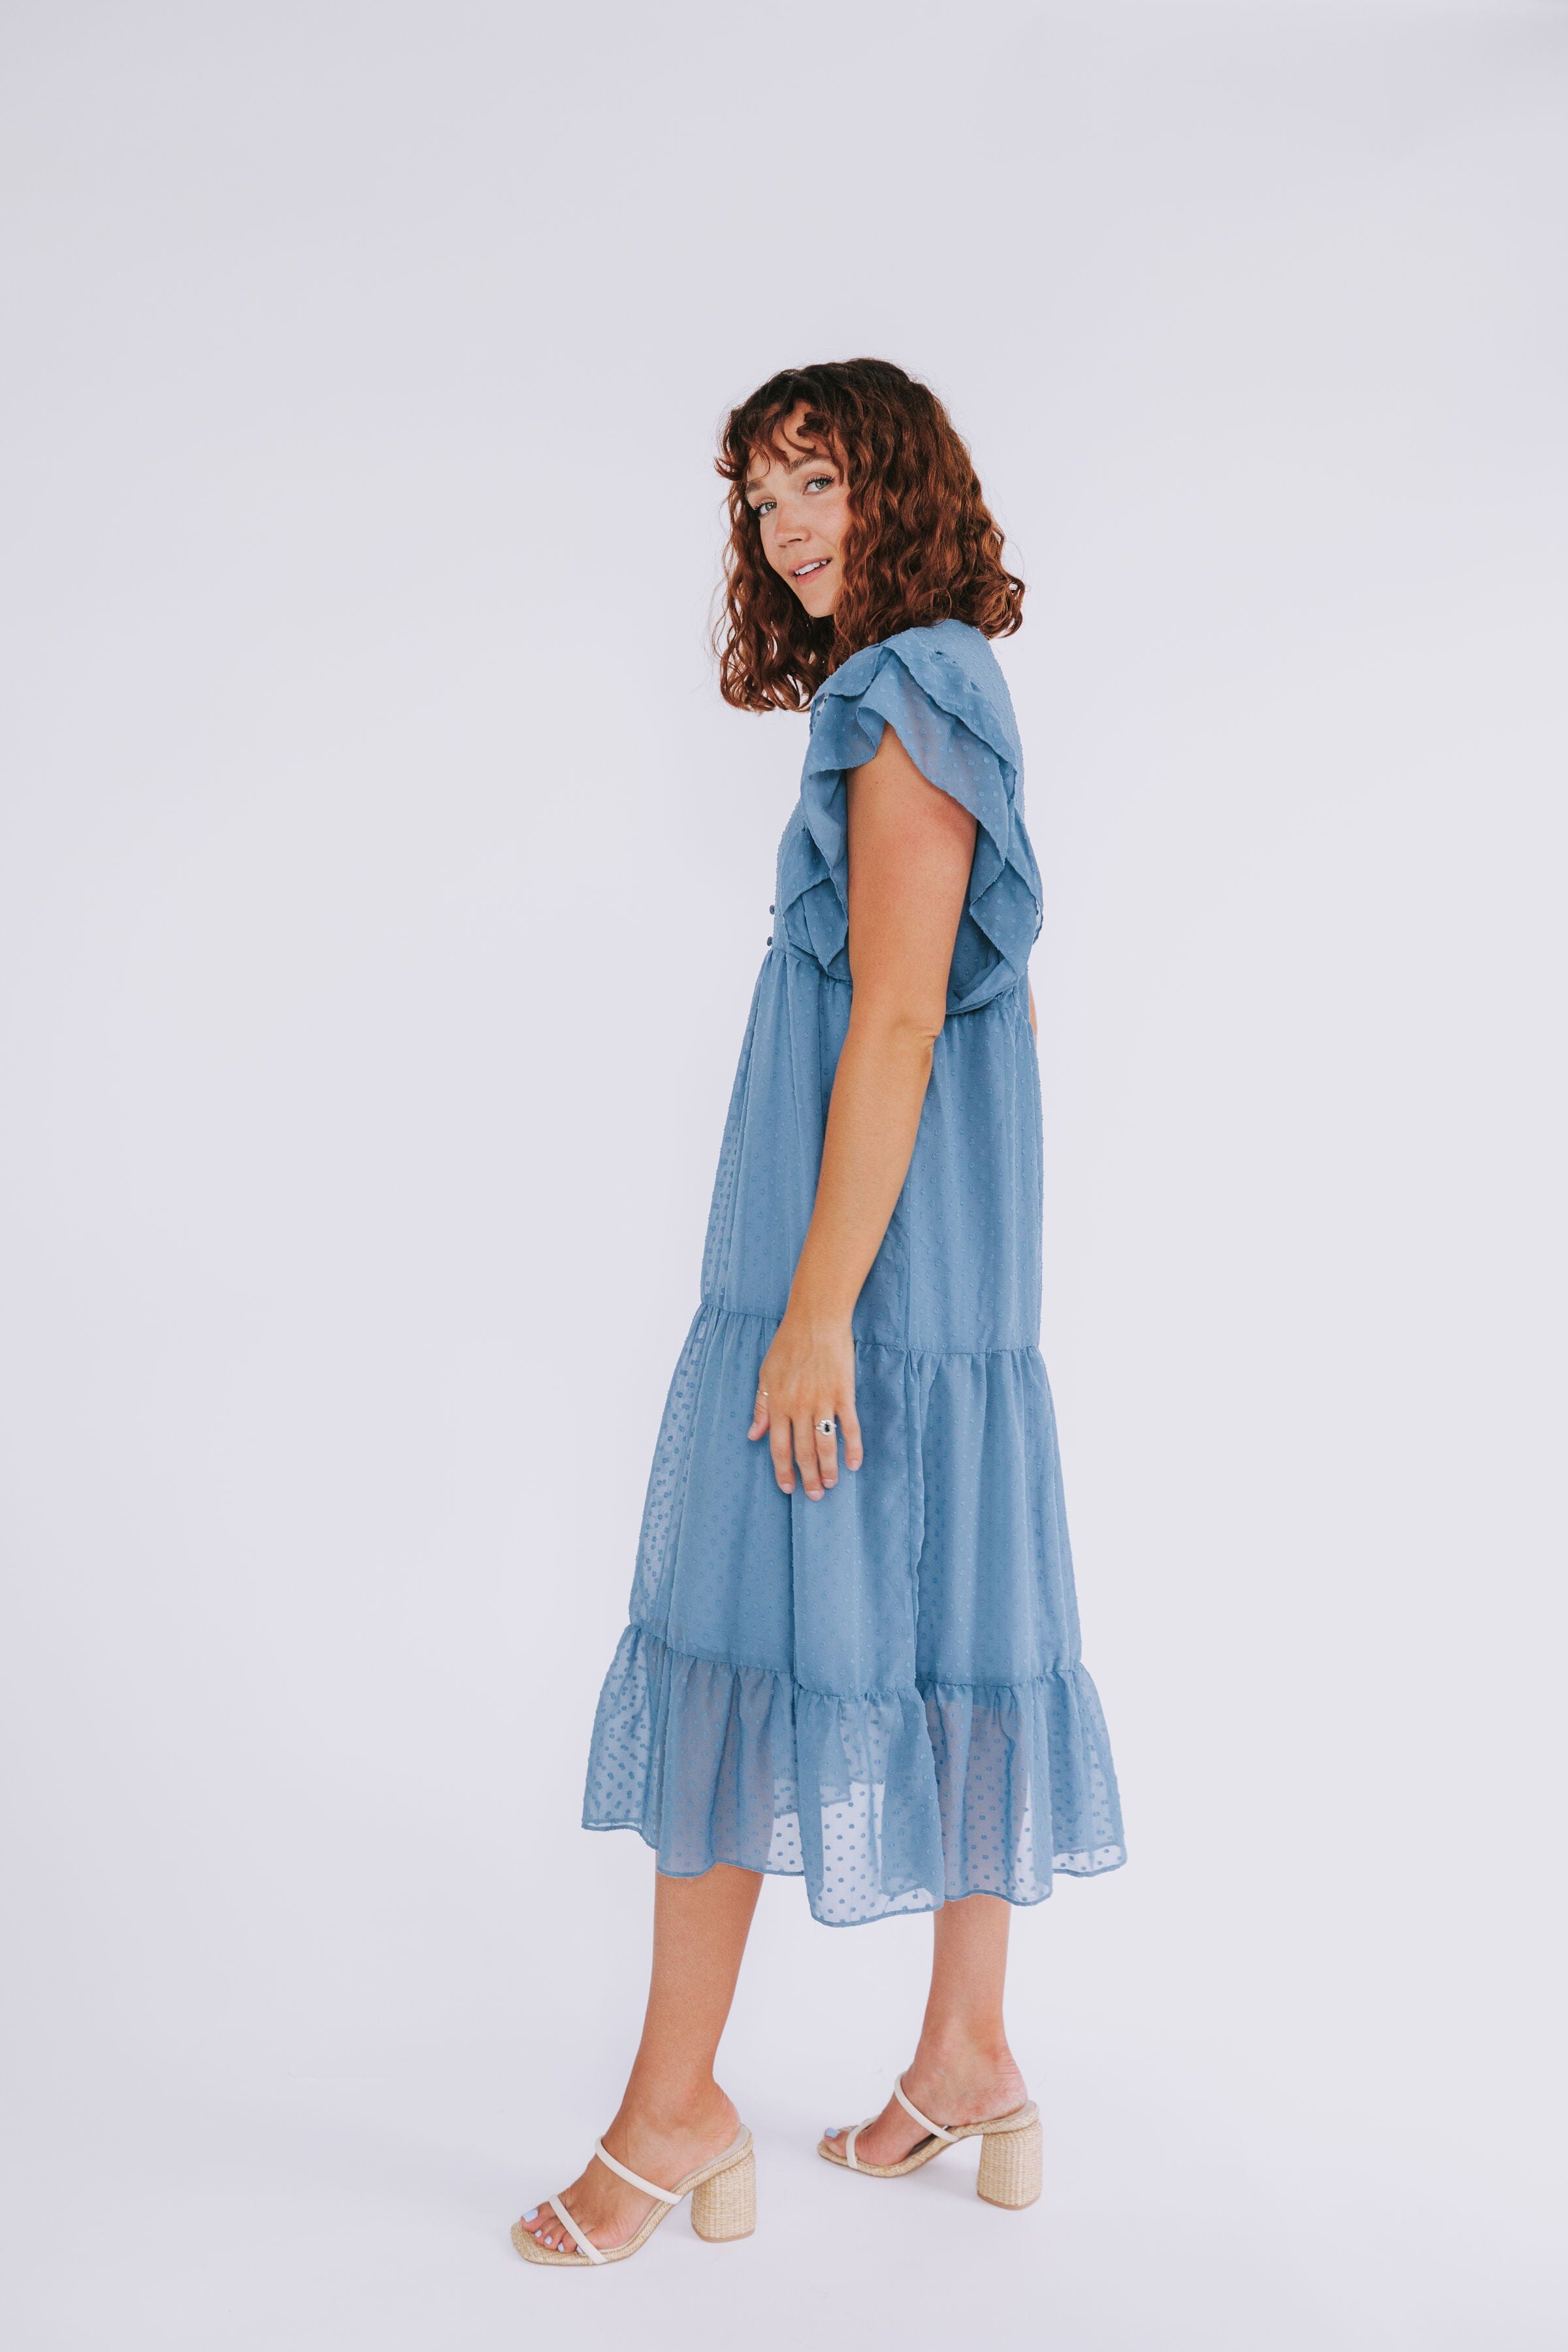 ONE LOVED BABE - June Dress - 8 Colors